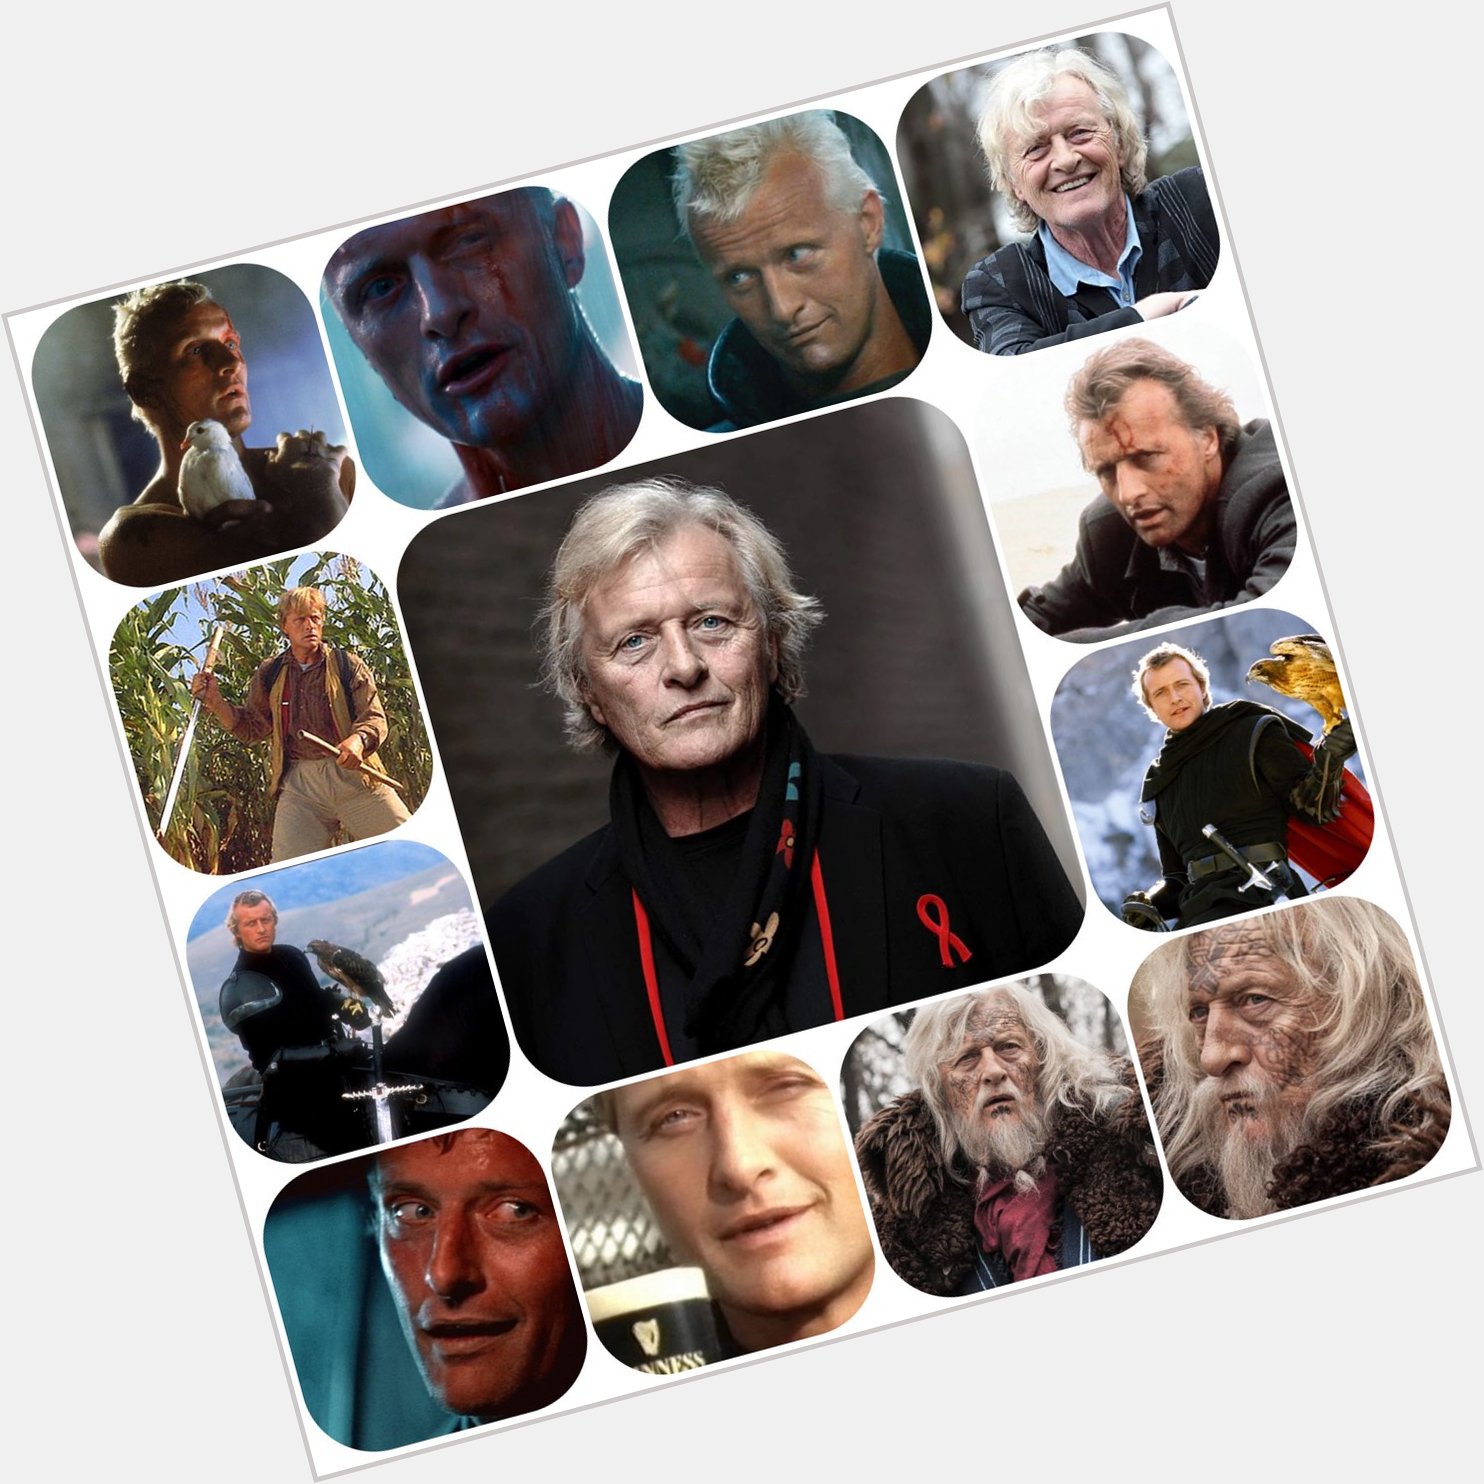 Happy birthday to the late, very great Rutger Hauer  